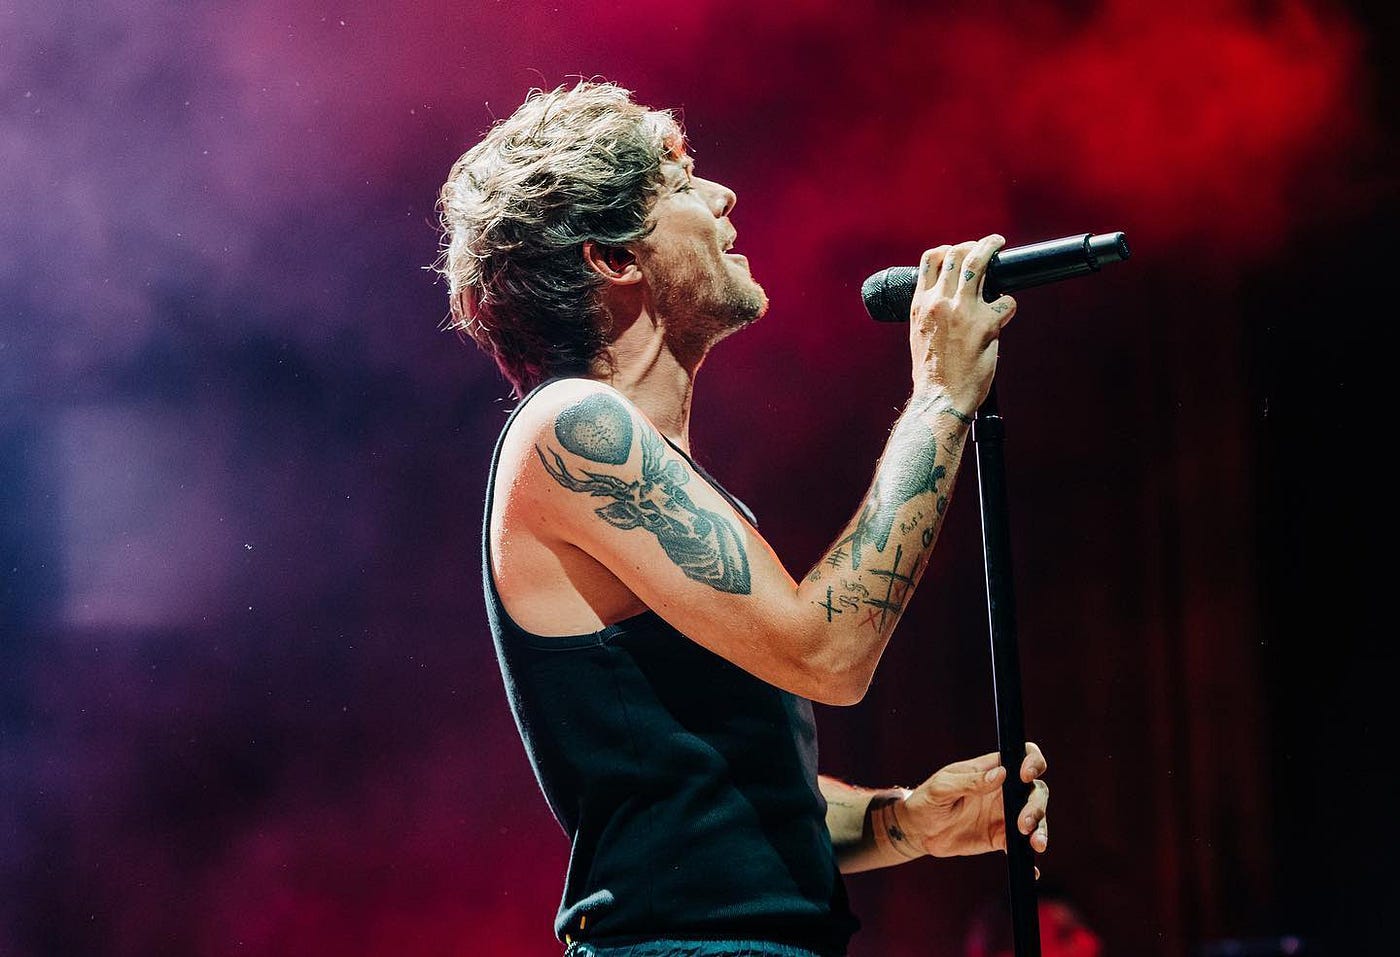 Louis Tomlinson, A Better Direction, by Addison Sage